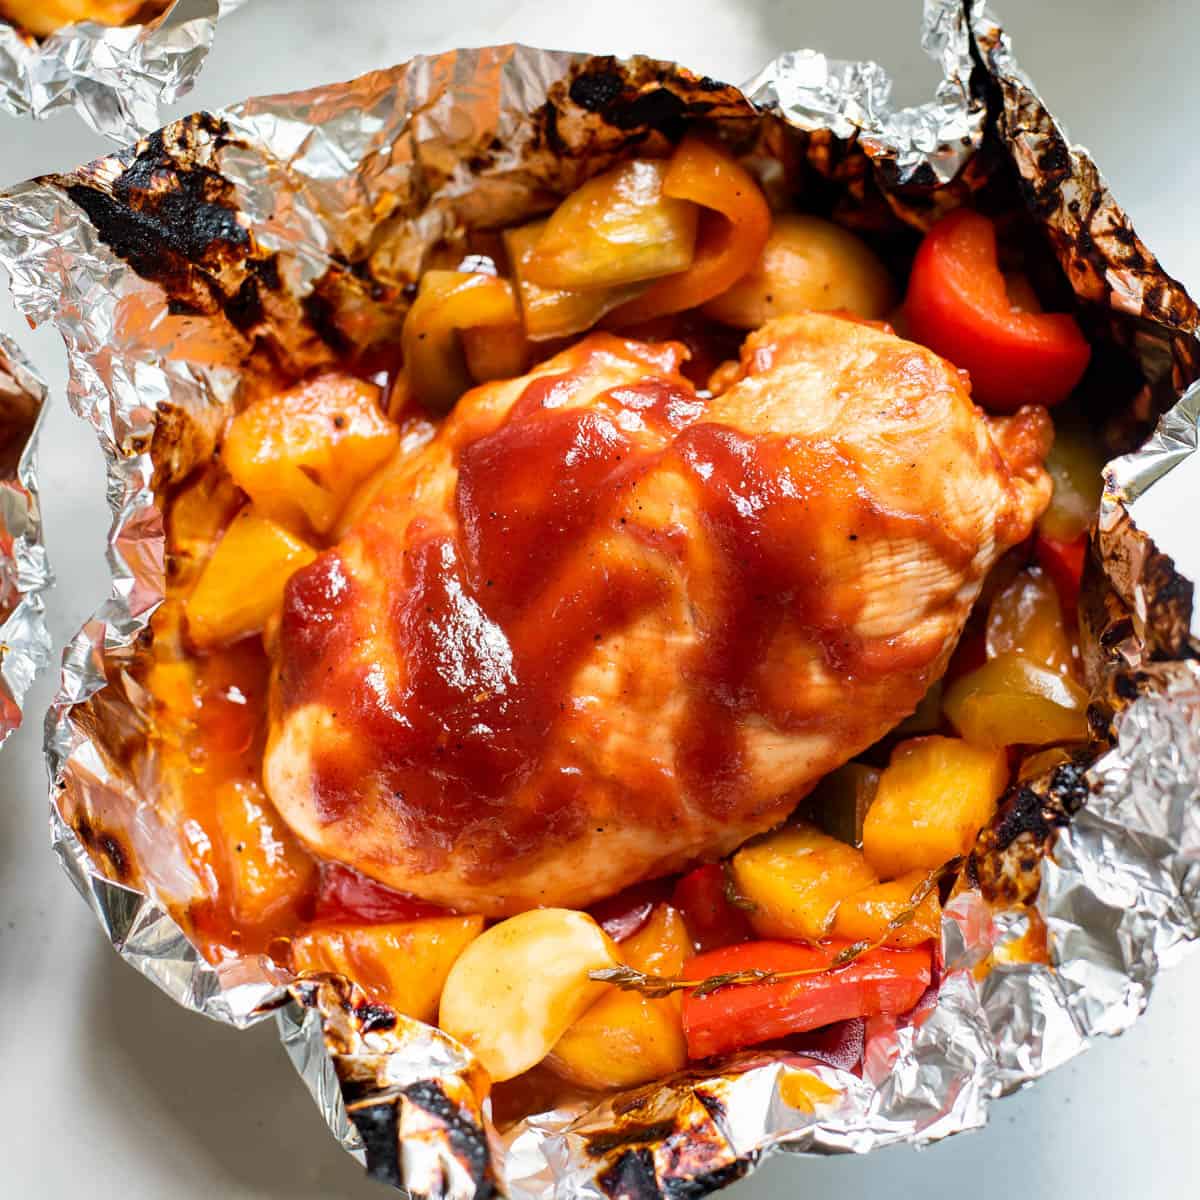 Barbecue Chicken Foil Packets - Spend With Pennies